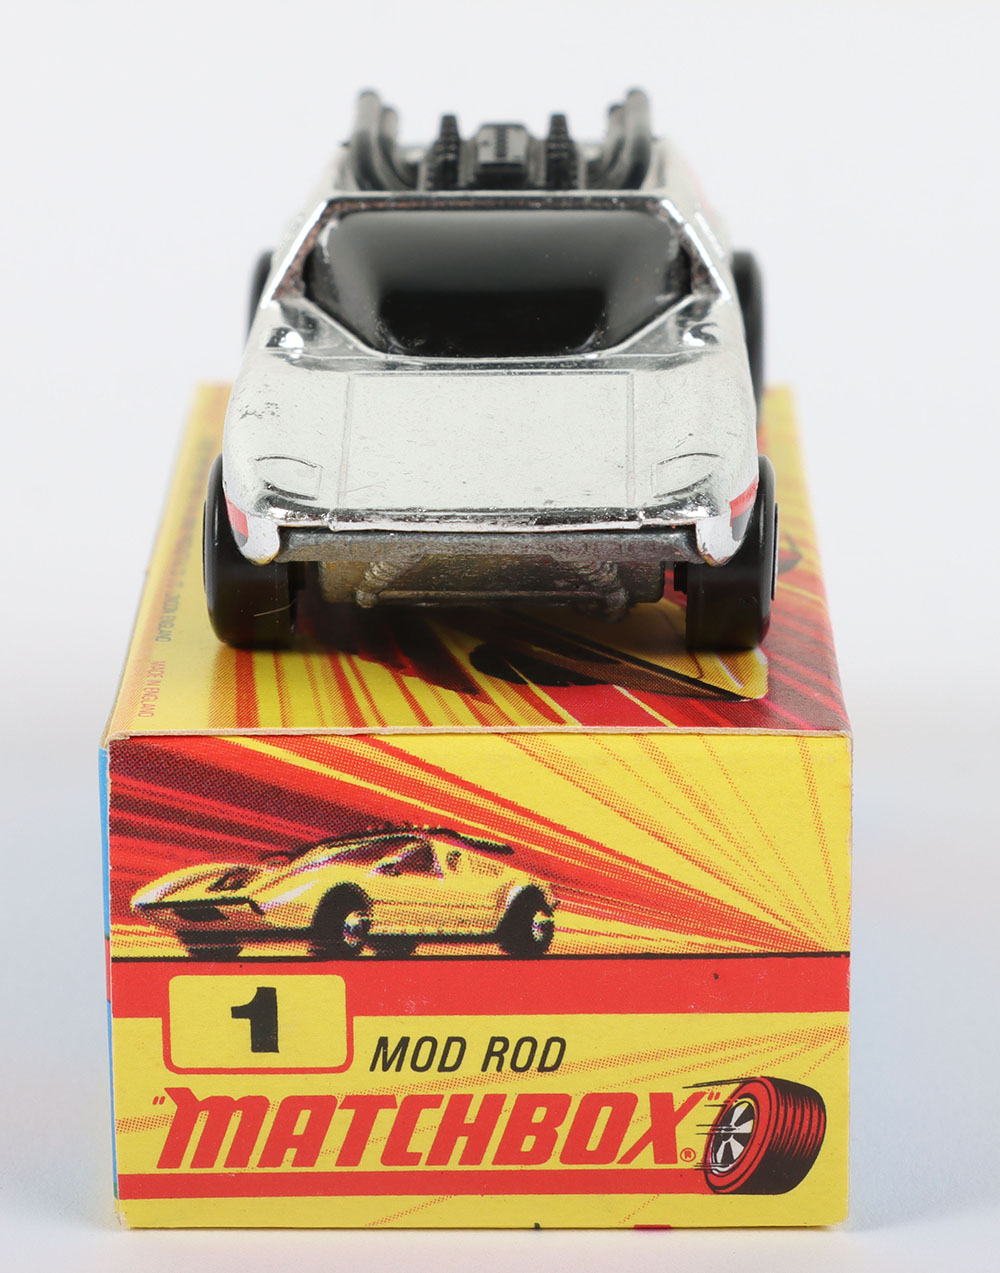 Matchbox Lesney Superfast MB-1 Mod Rod with SILVER body and BLACK ENGINE - Image 3 of 5